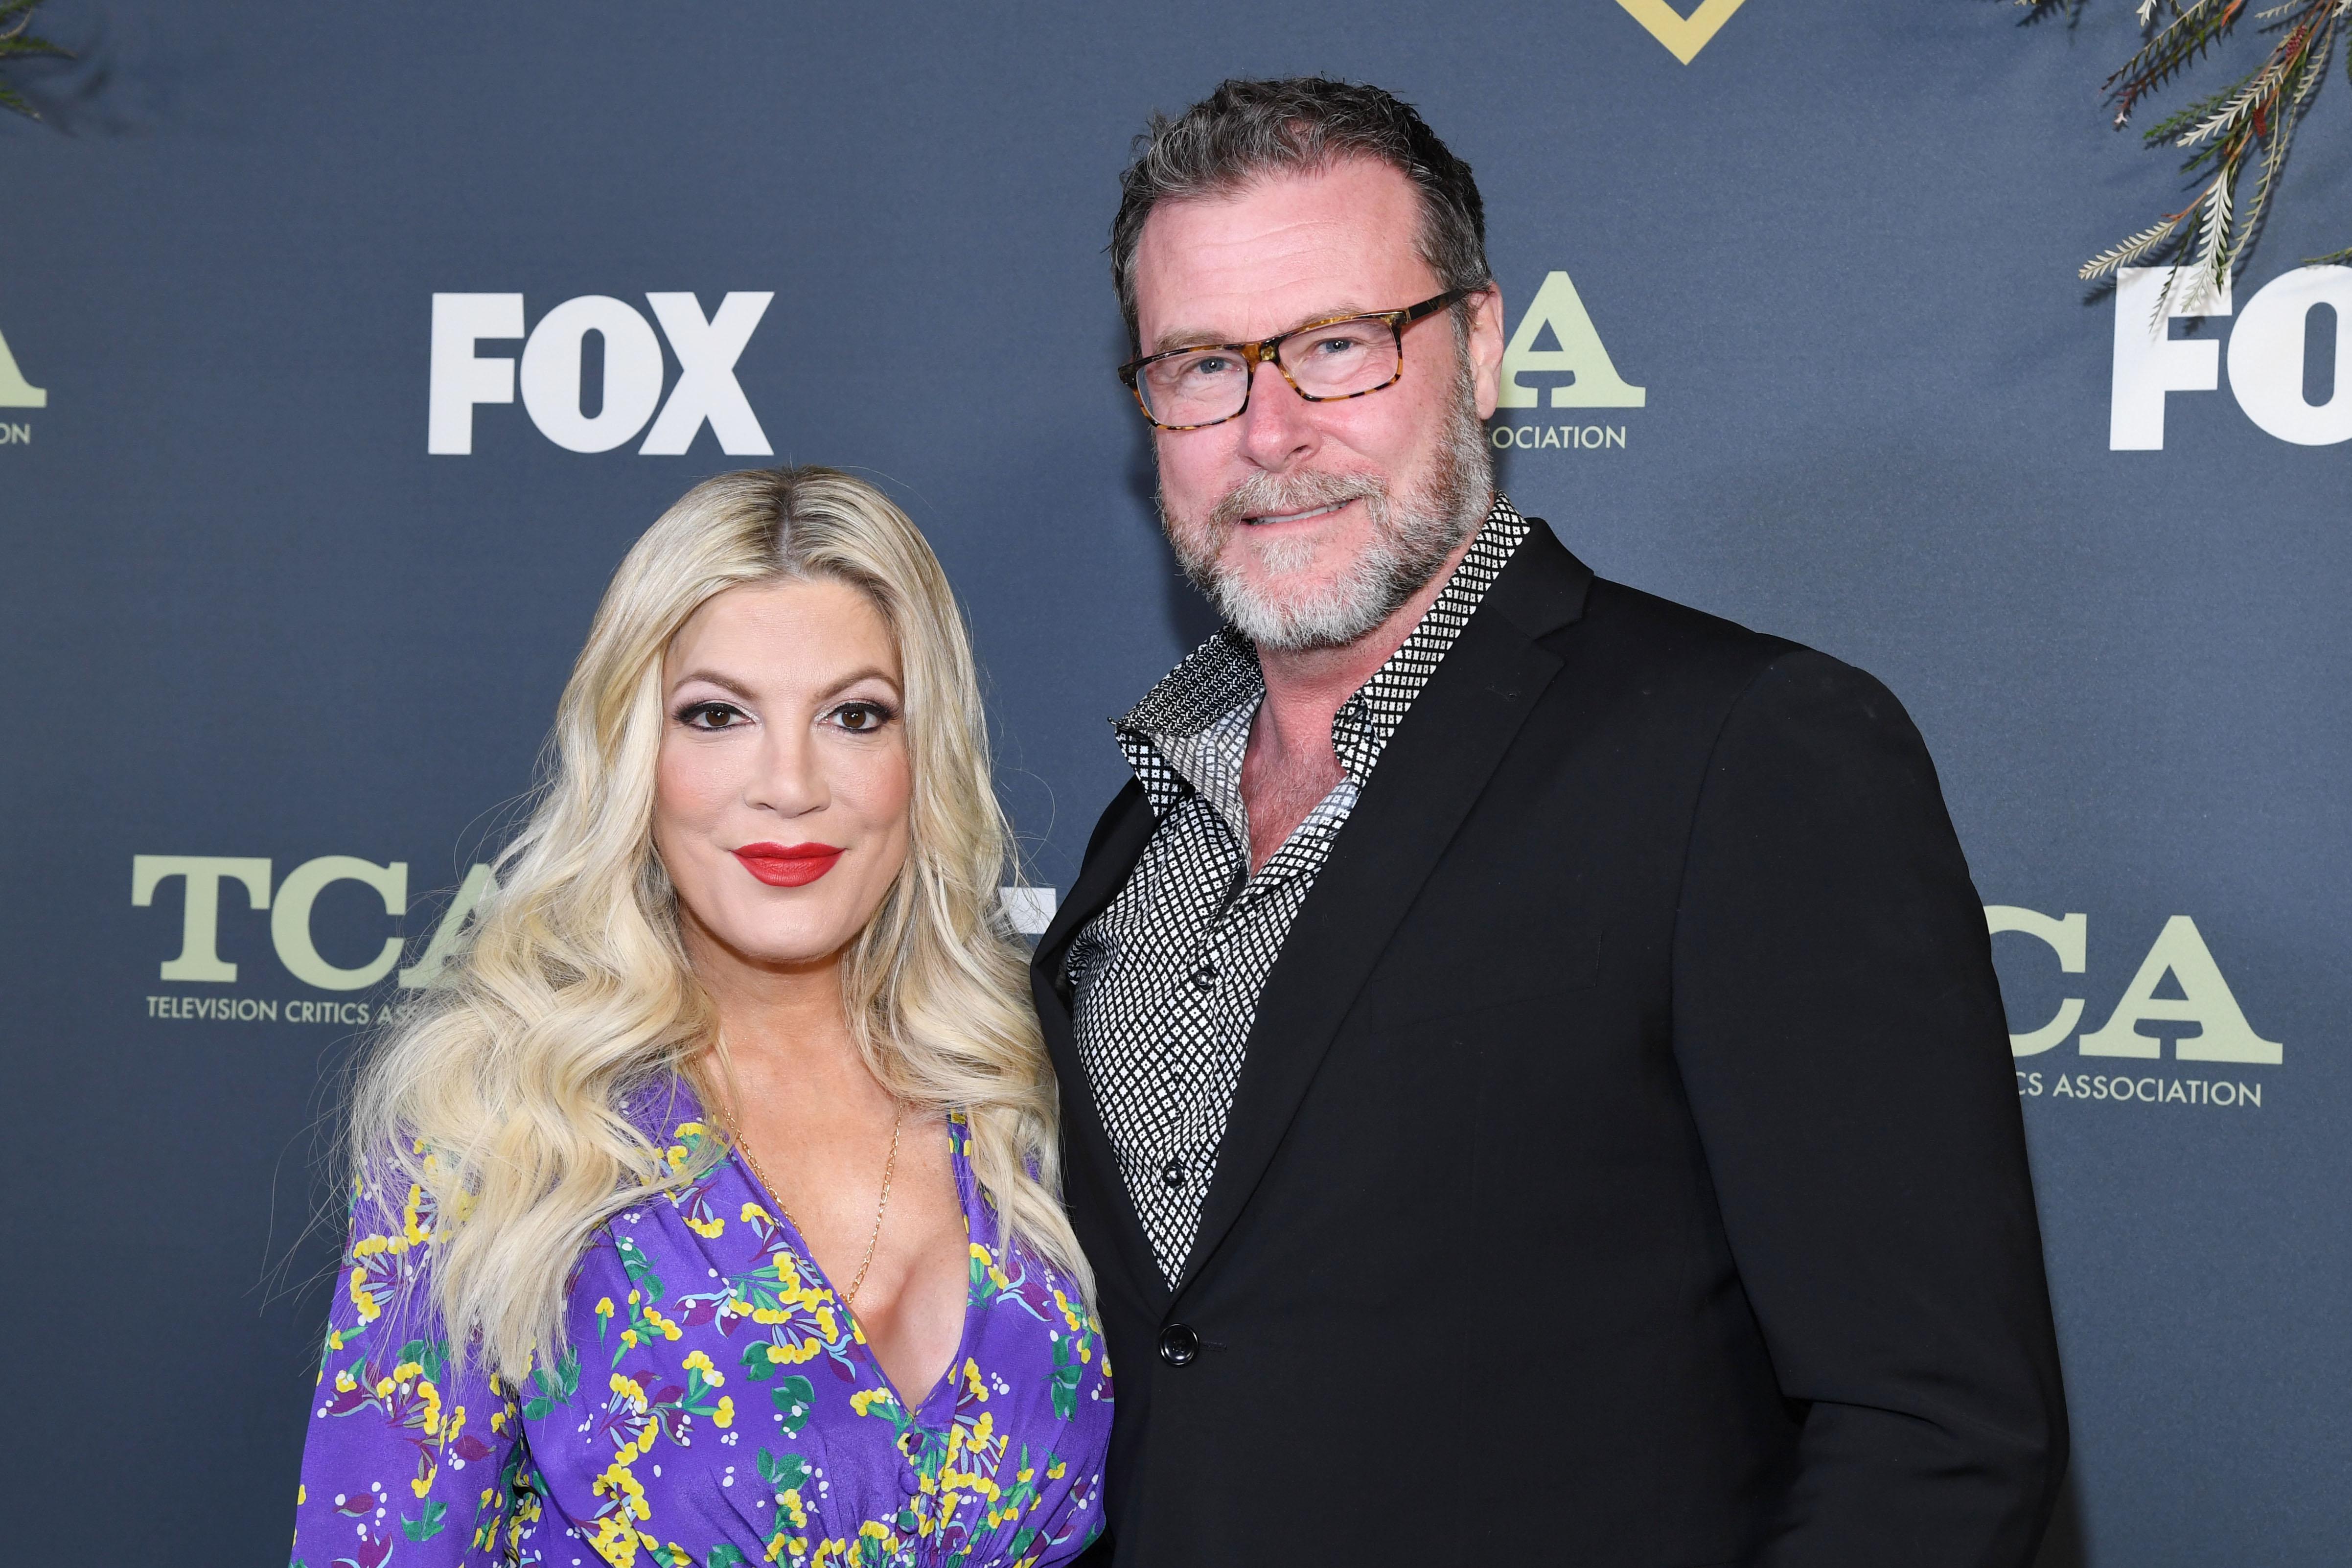 Tori Spelling Has HUGE Tax Problems, Makes List Of Top 500 Tax Delinquents In California